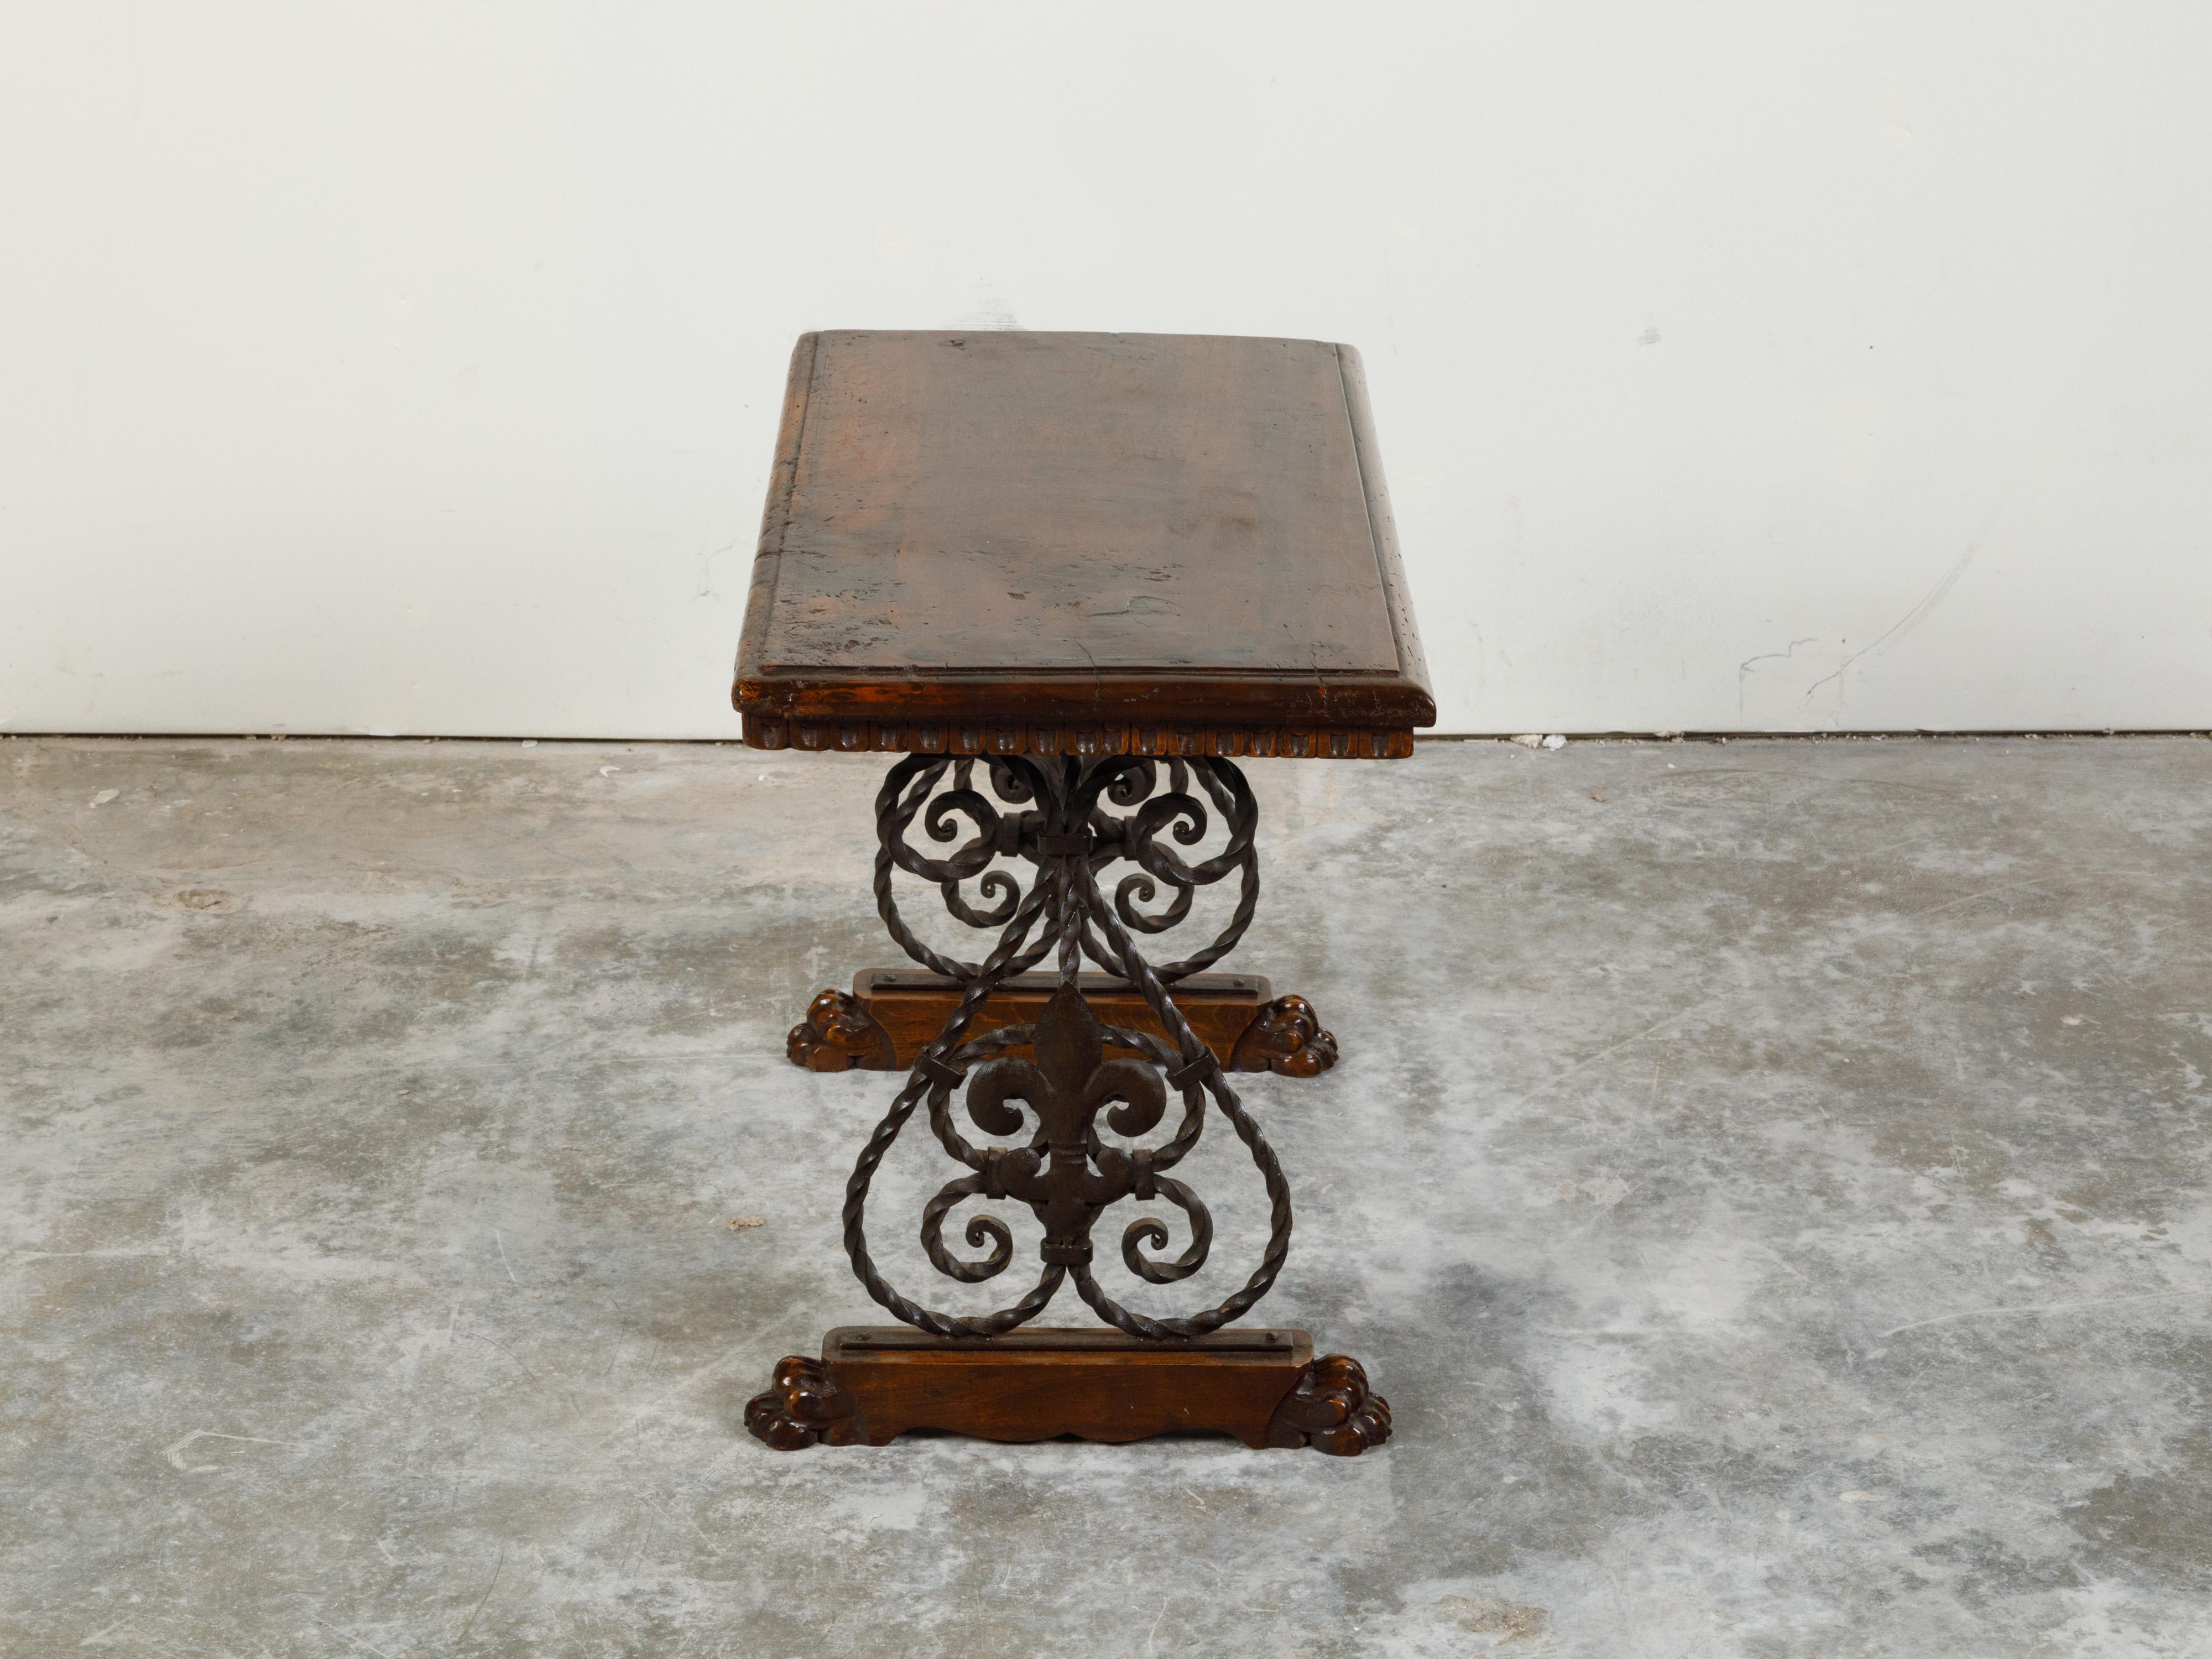 Italian 1900s Walnut Top Console Table with Iron Base and Fleur de Lys Motifs For Sale 1